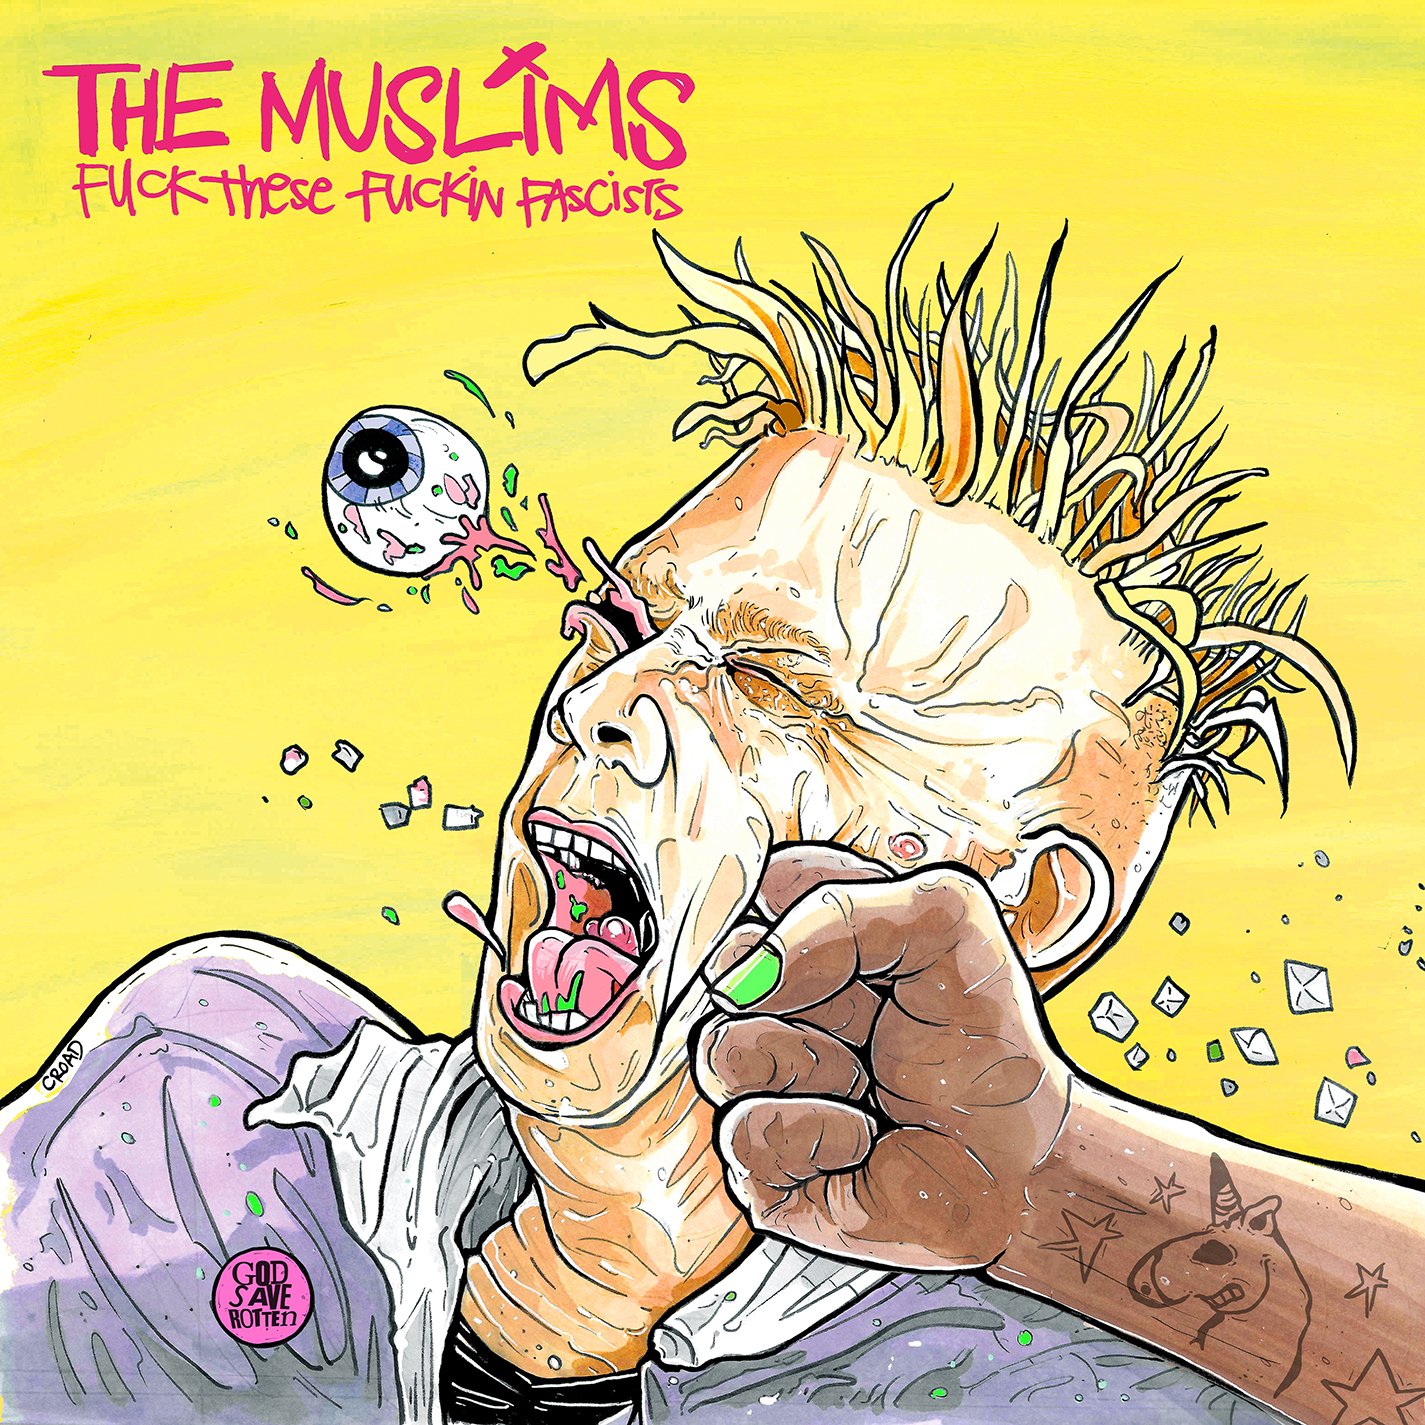 The Muslims - Fuck These Fuckin Fascists - CD